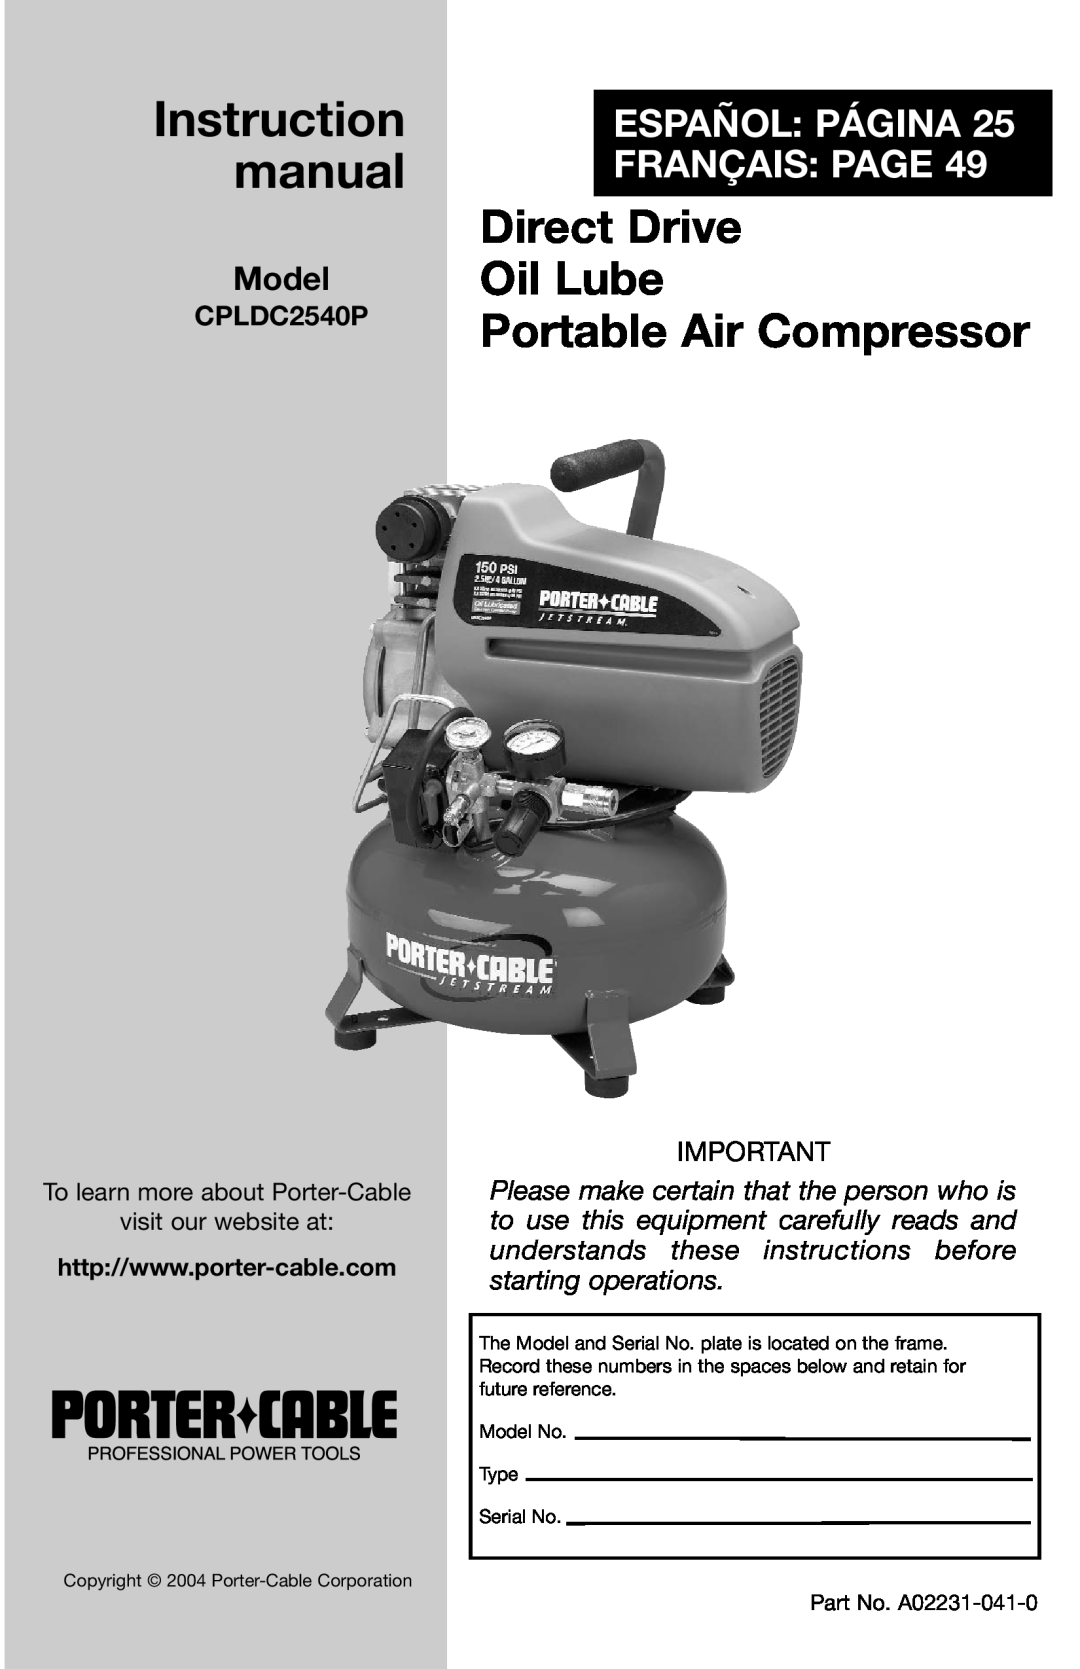 Porter-Cable CPLDC2540P instruction manual Model, Instruction, Direct Drive, Oil Lube, Portable Air Compressor 